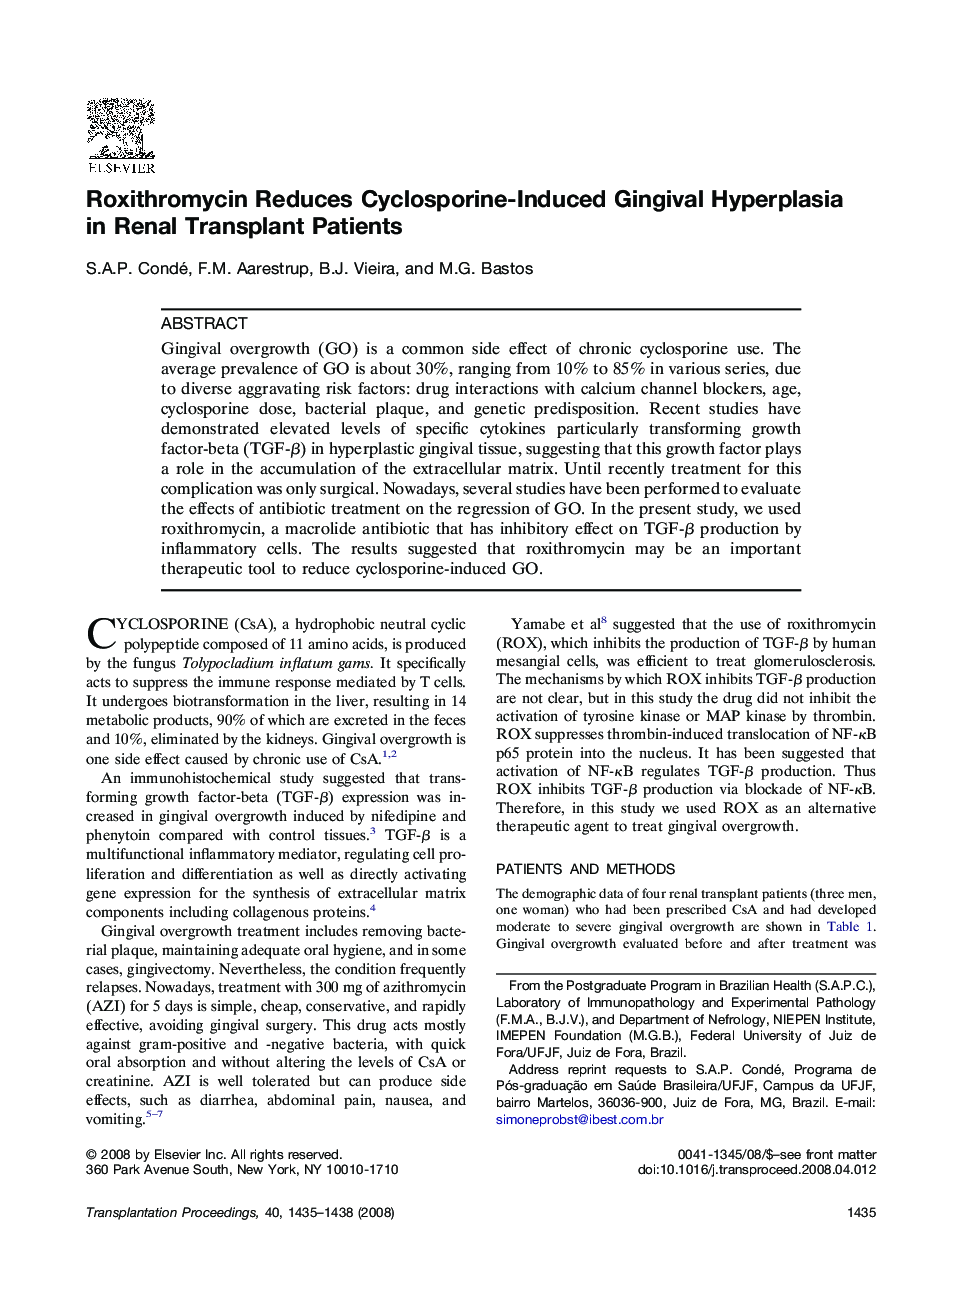 Roxithromycin Reduces Cyclosporine-Induced Gingival Hyperplasia in Renal Transplant Patients